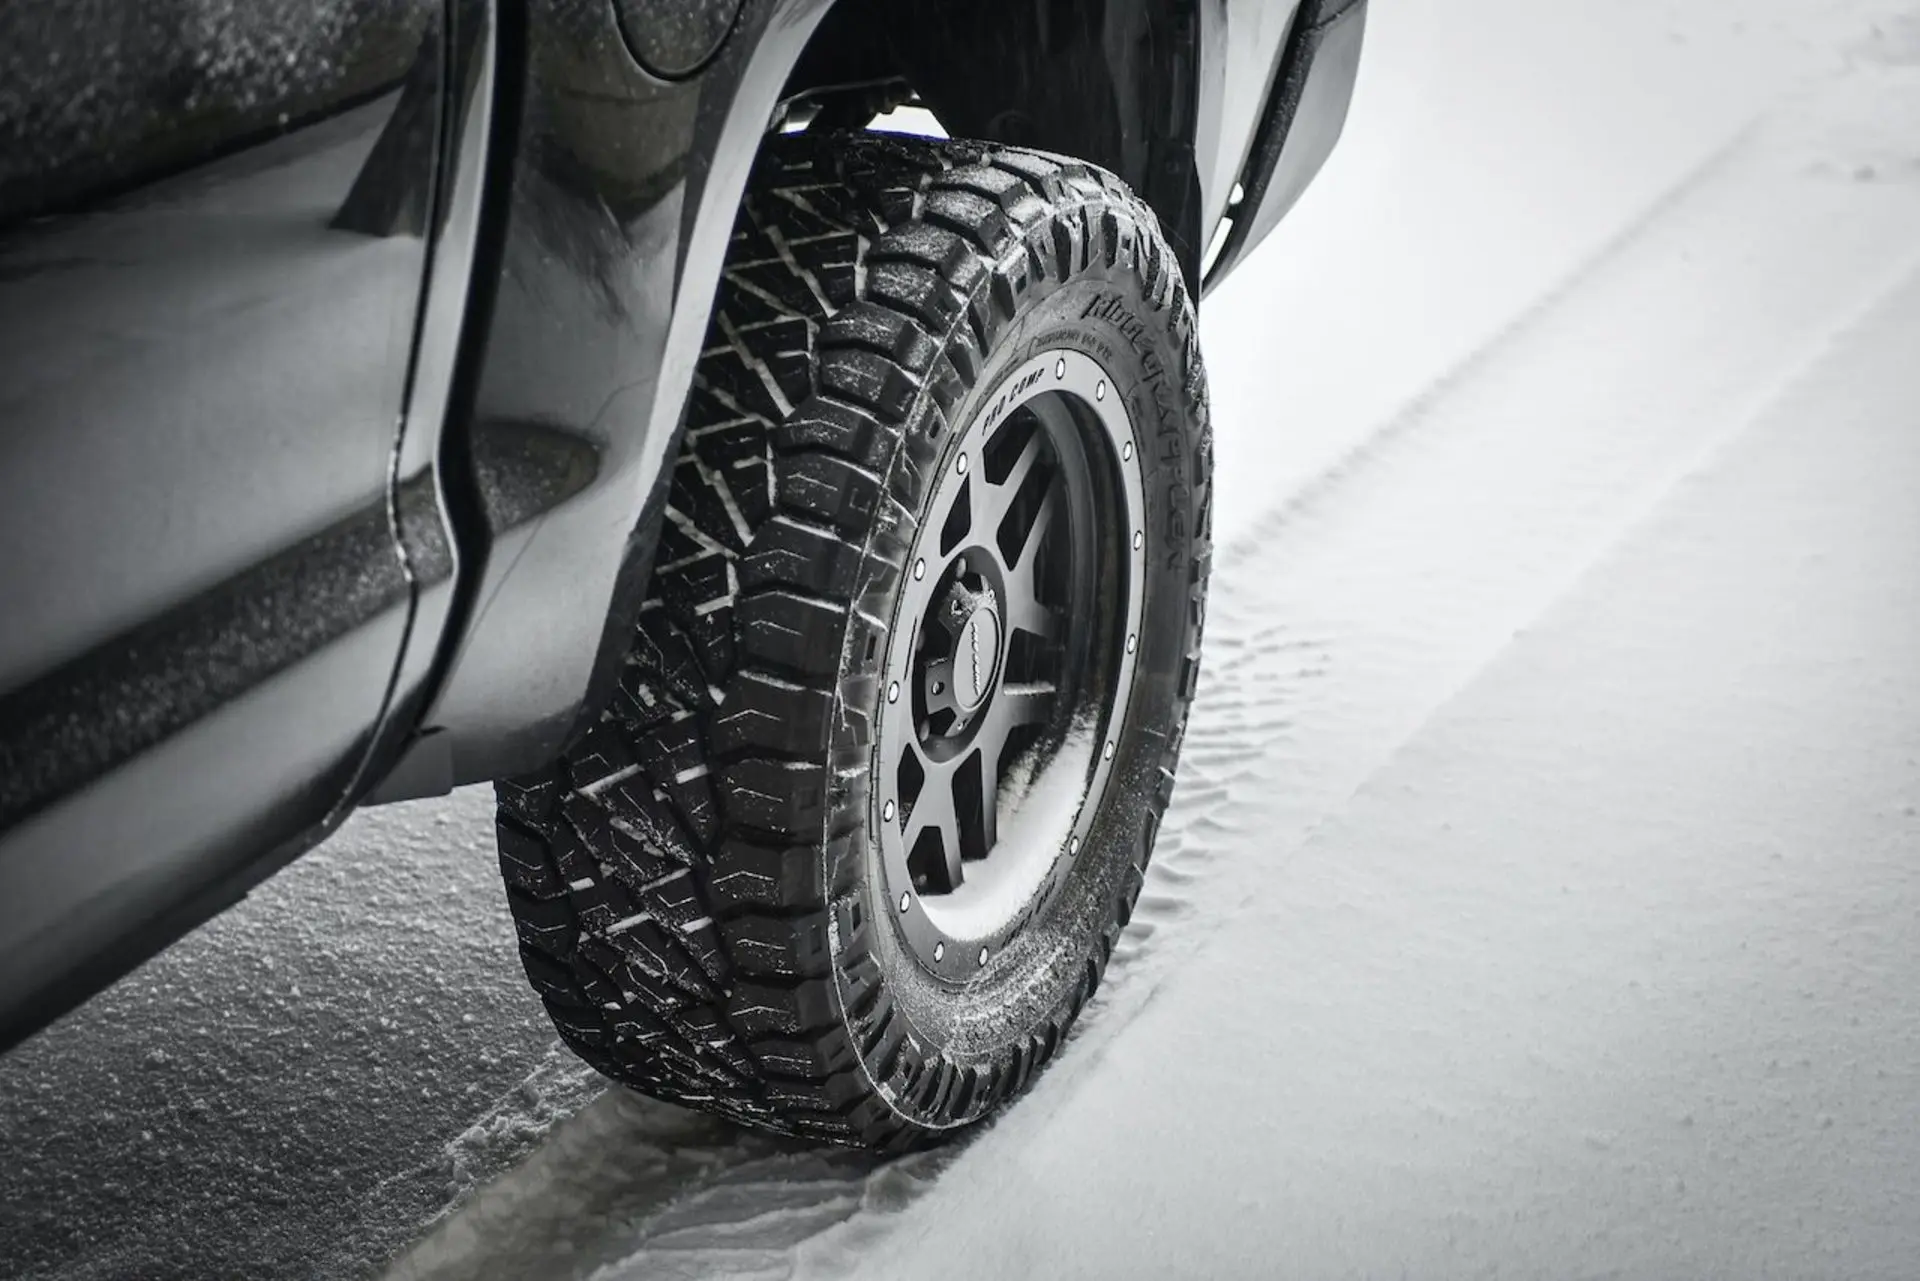 Think twice if you're still debating on whether to use winter tires